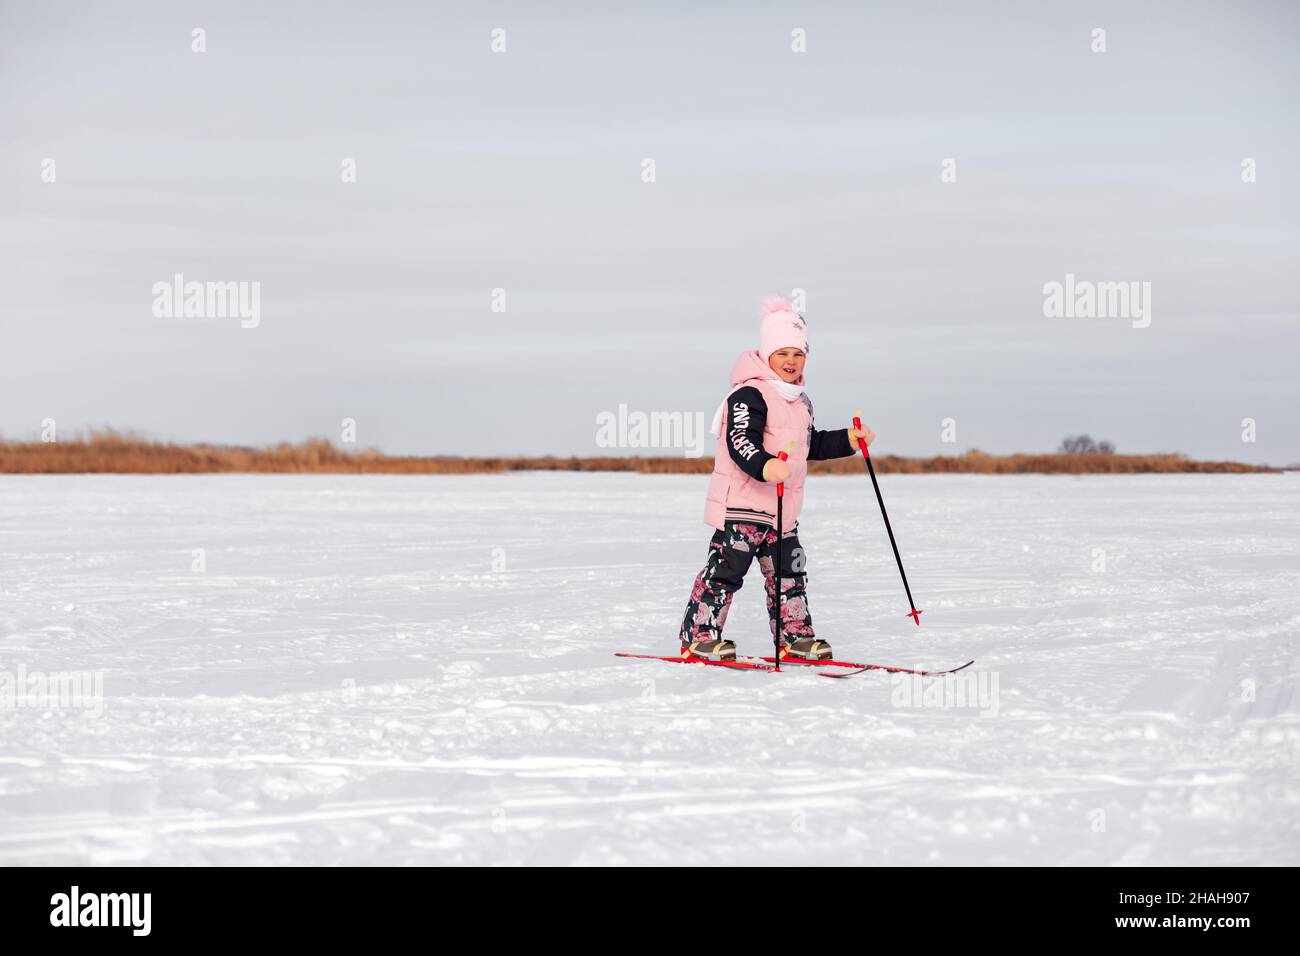 Child learns to ski. Little girl in pink warm suit skiing in snow on frosty winter day, side view, snow background Stock Photo